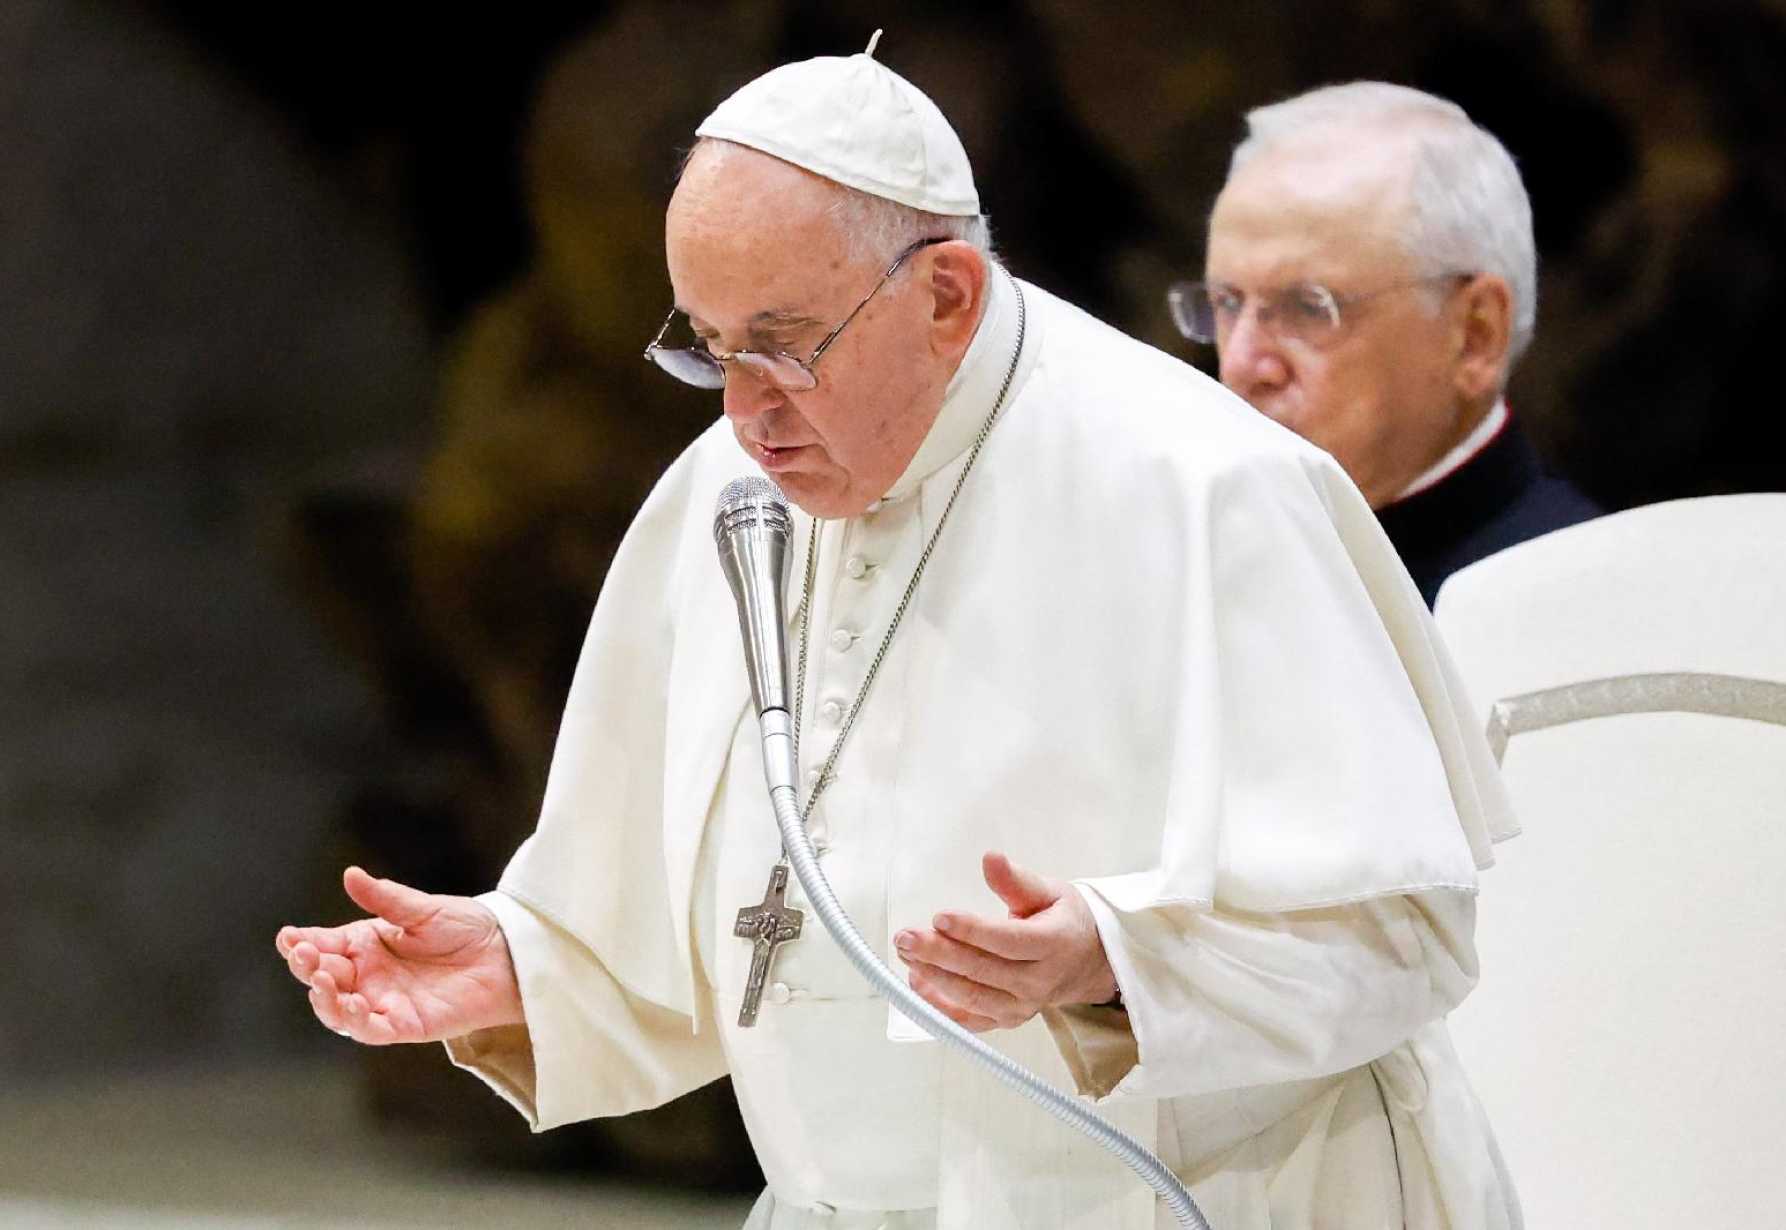 Guadalupe shows how faith is shared simply, with respect, pope says